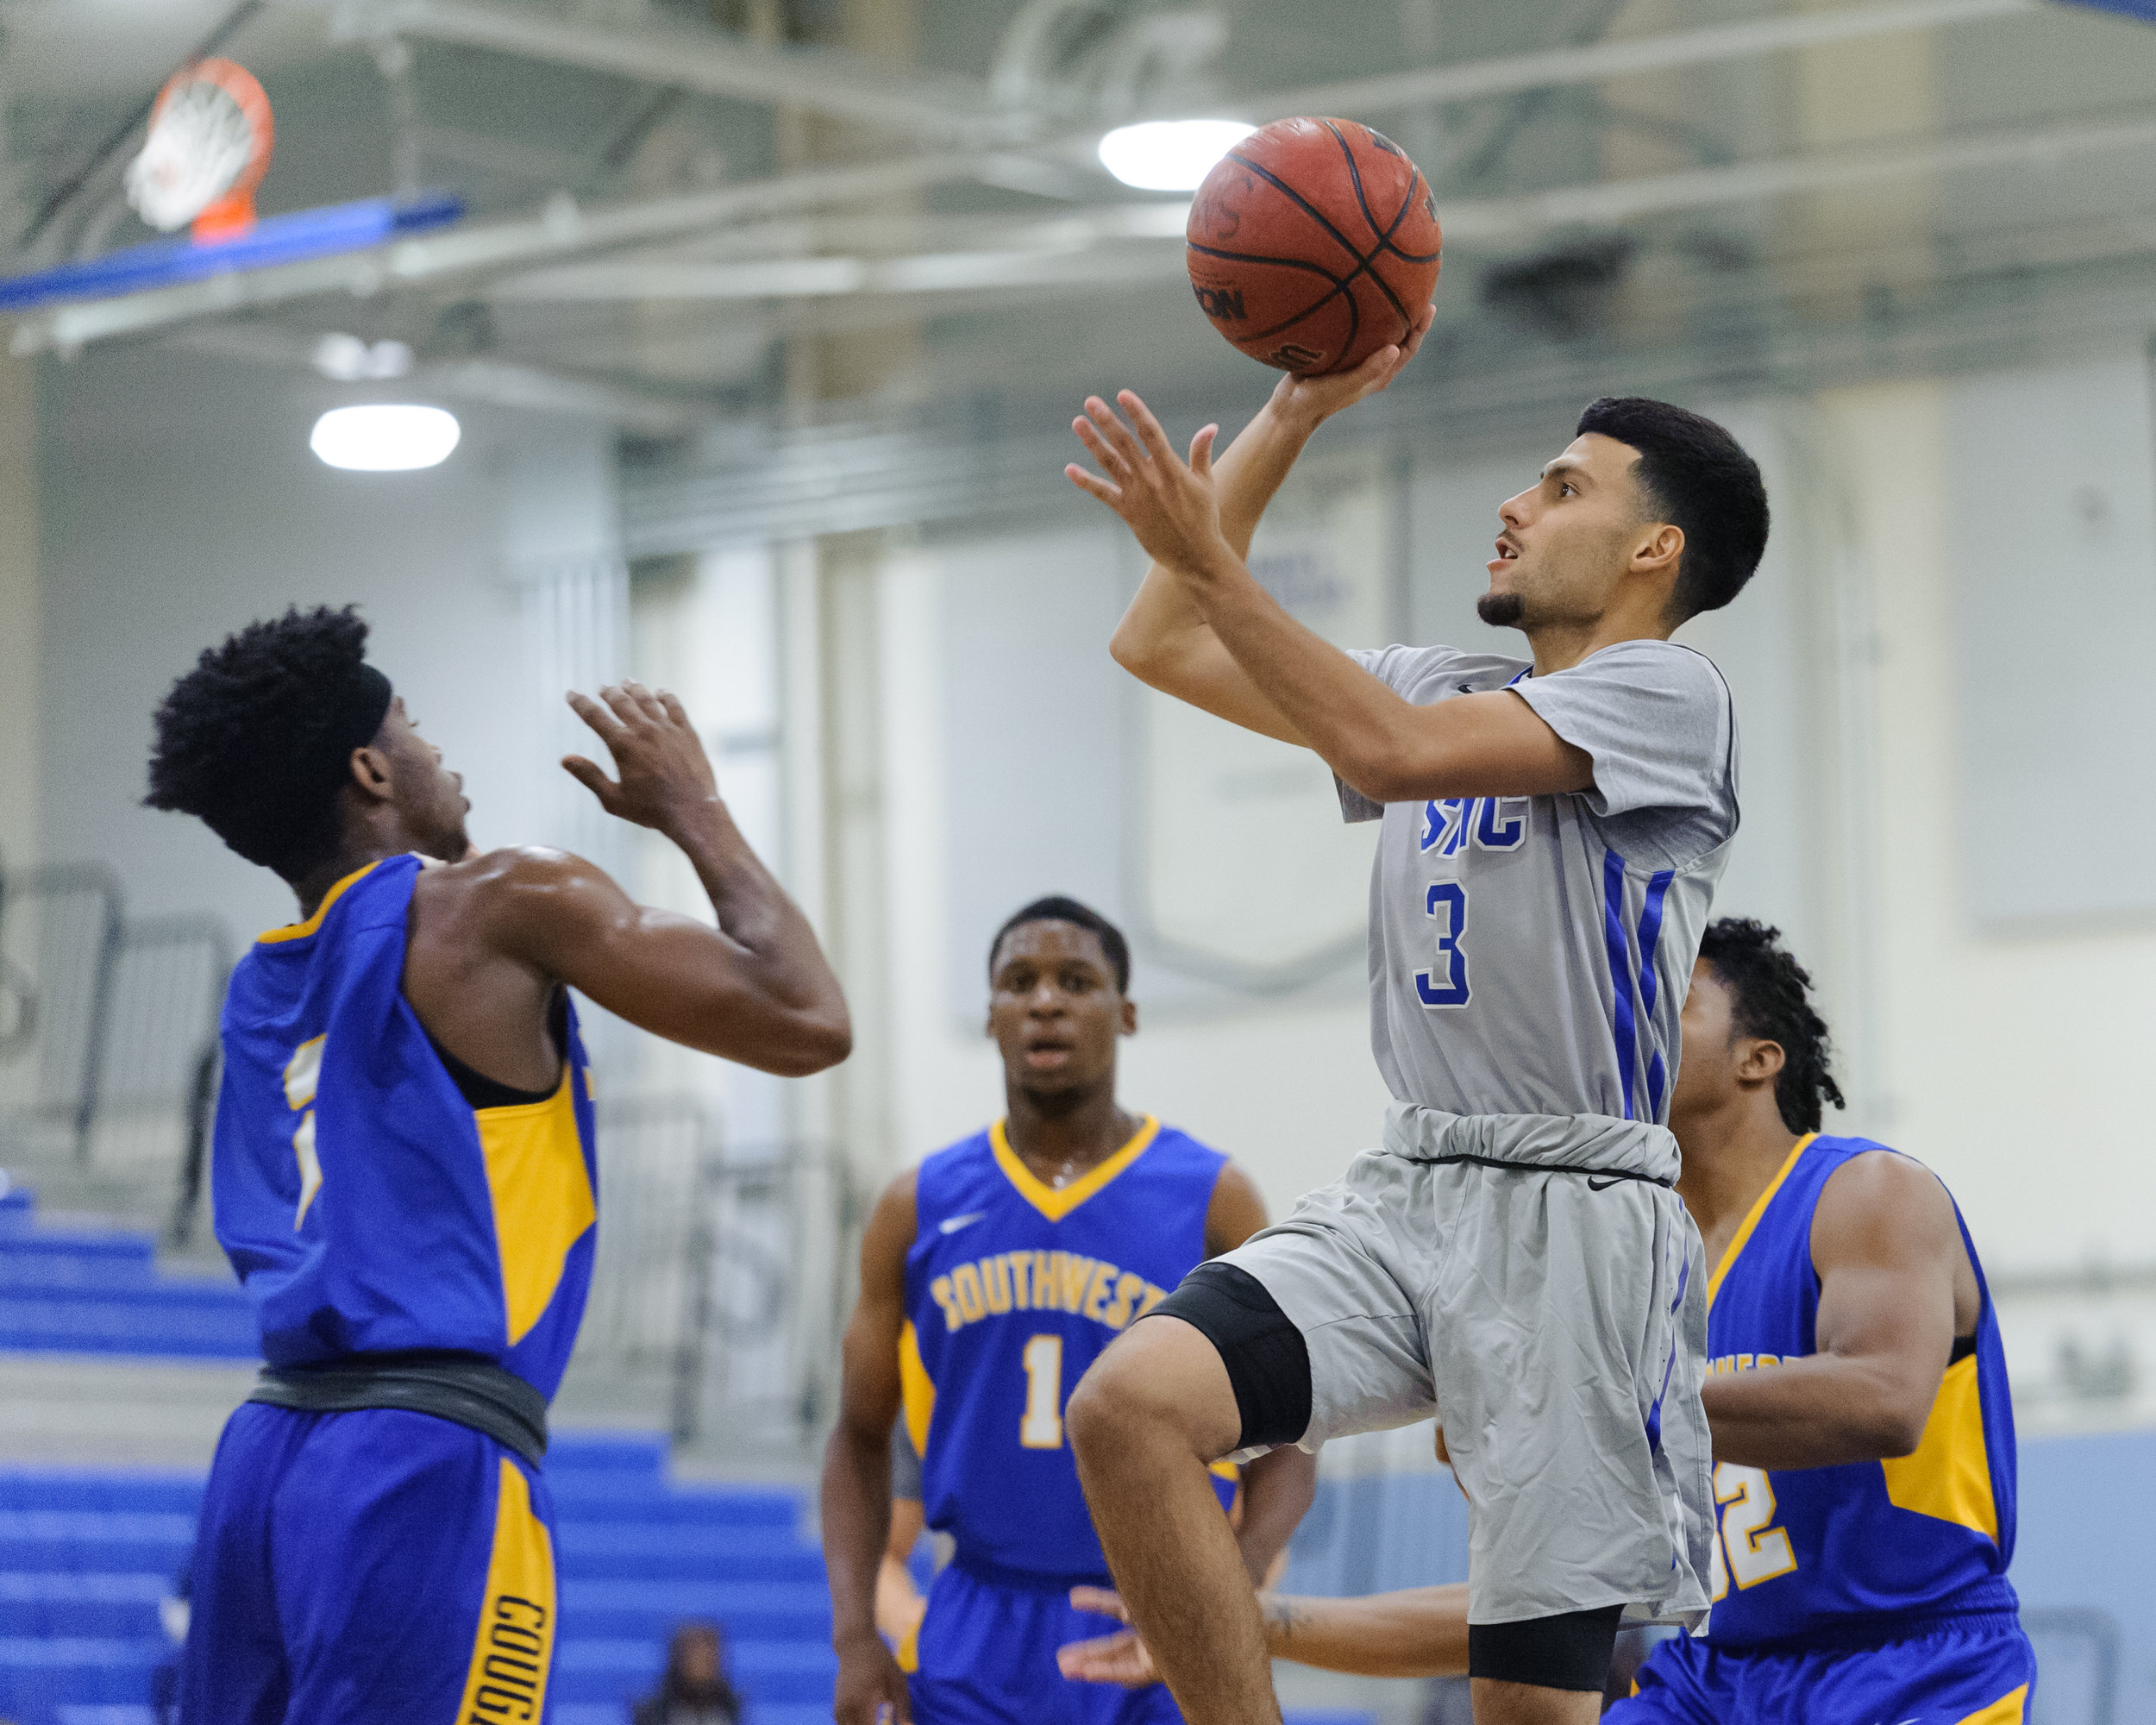  Guard Ernie Valadez (3) of Santa Monica College shoots a floater over the top of the Southwest College defense. The Santa Monica College Corsairs win their first home game of the season 84-53 against the Southwest College Cougars. The game was held 